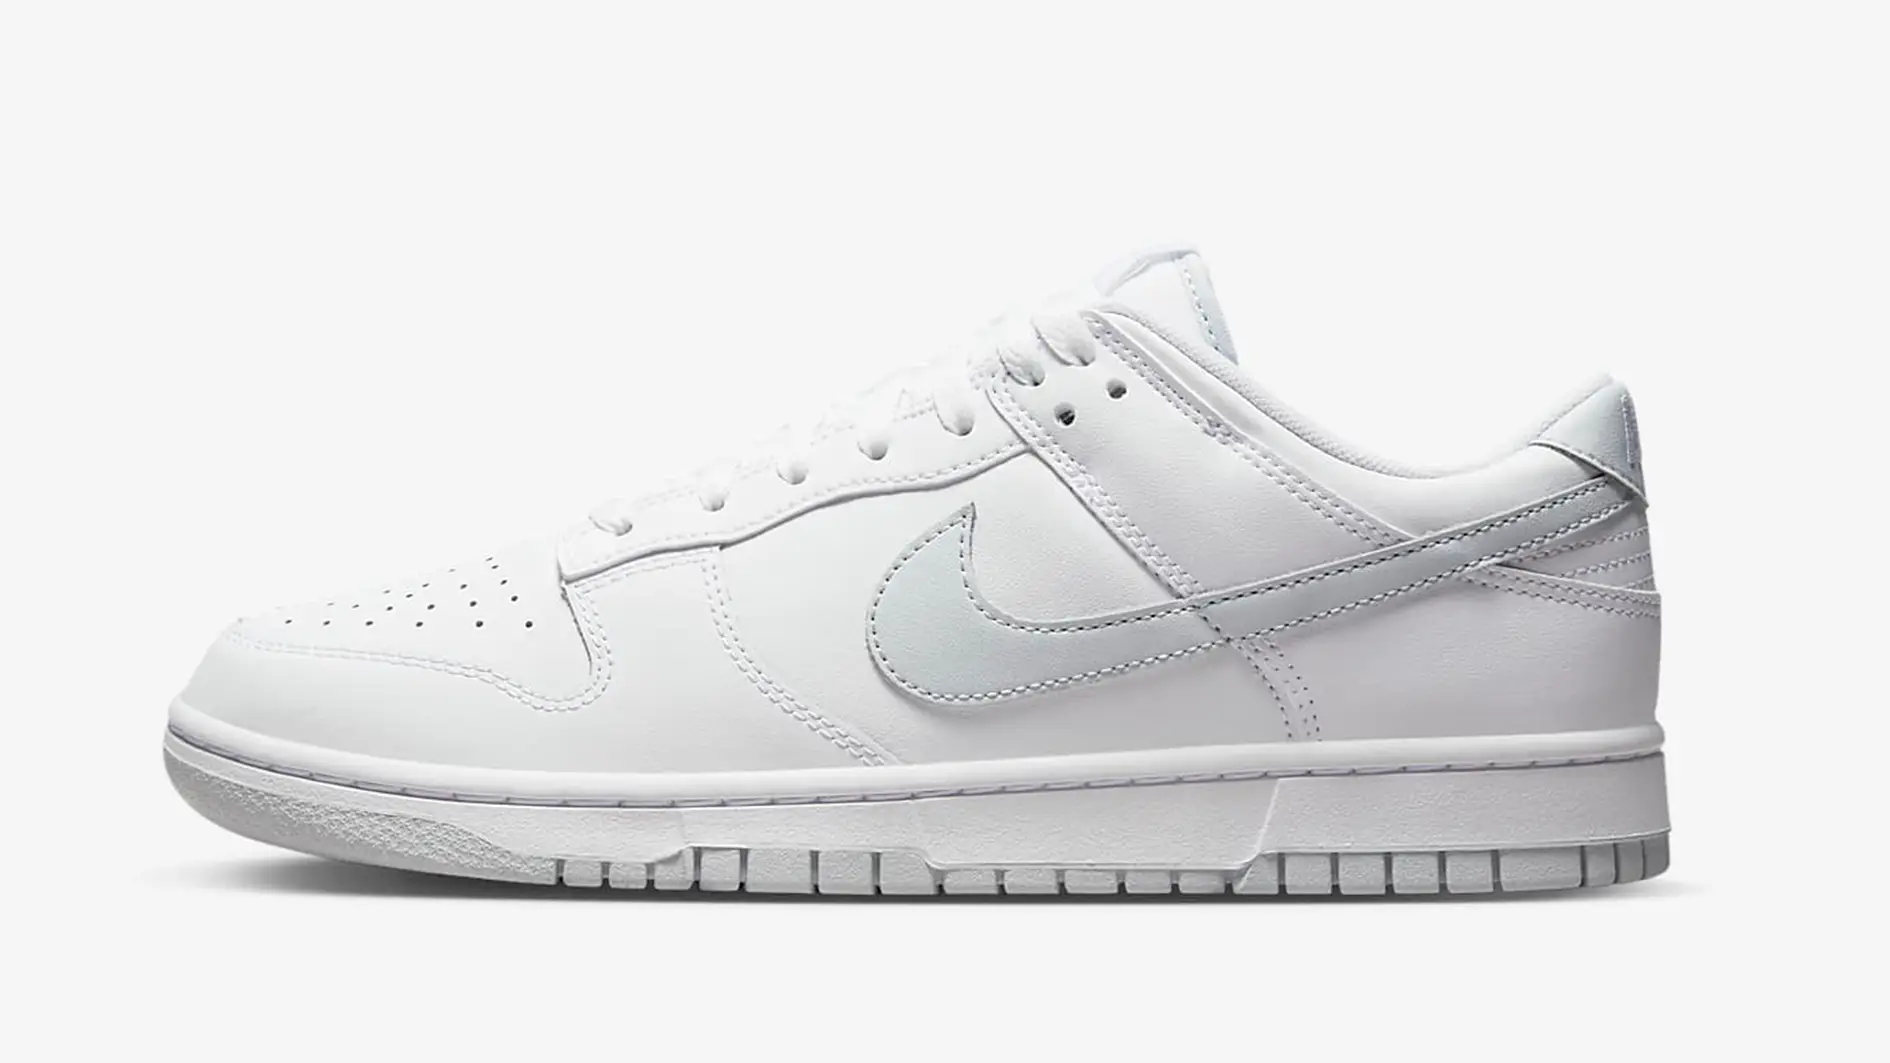 Get Set For Spring With These Super-Clean Nike Dunk Colourways | The ...